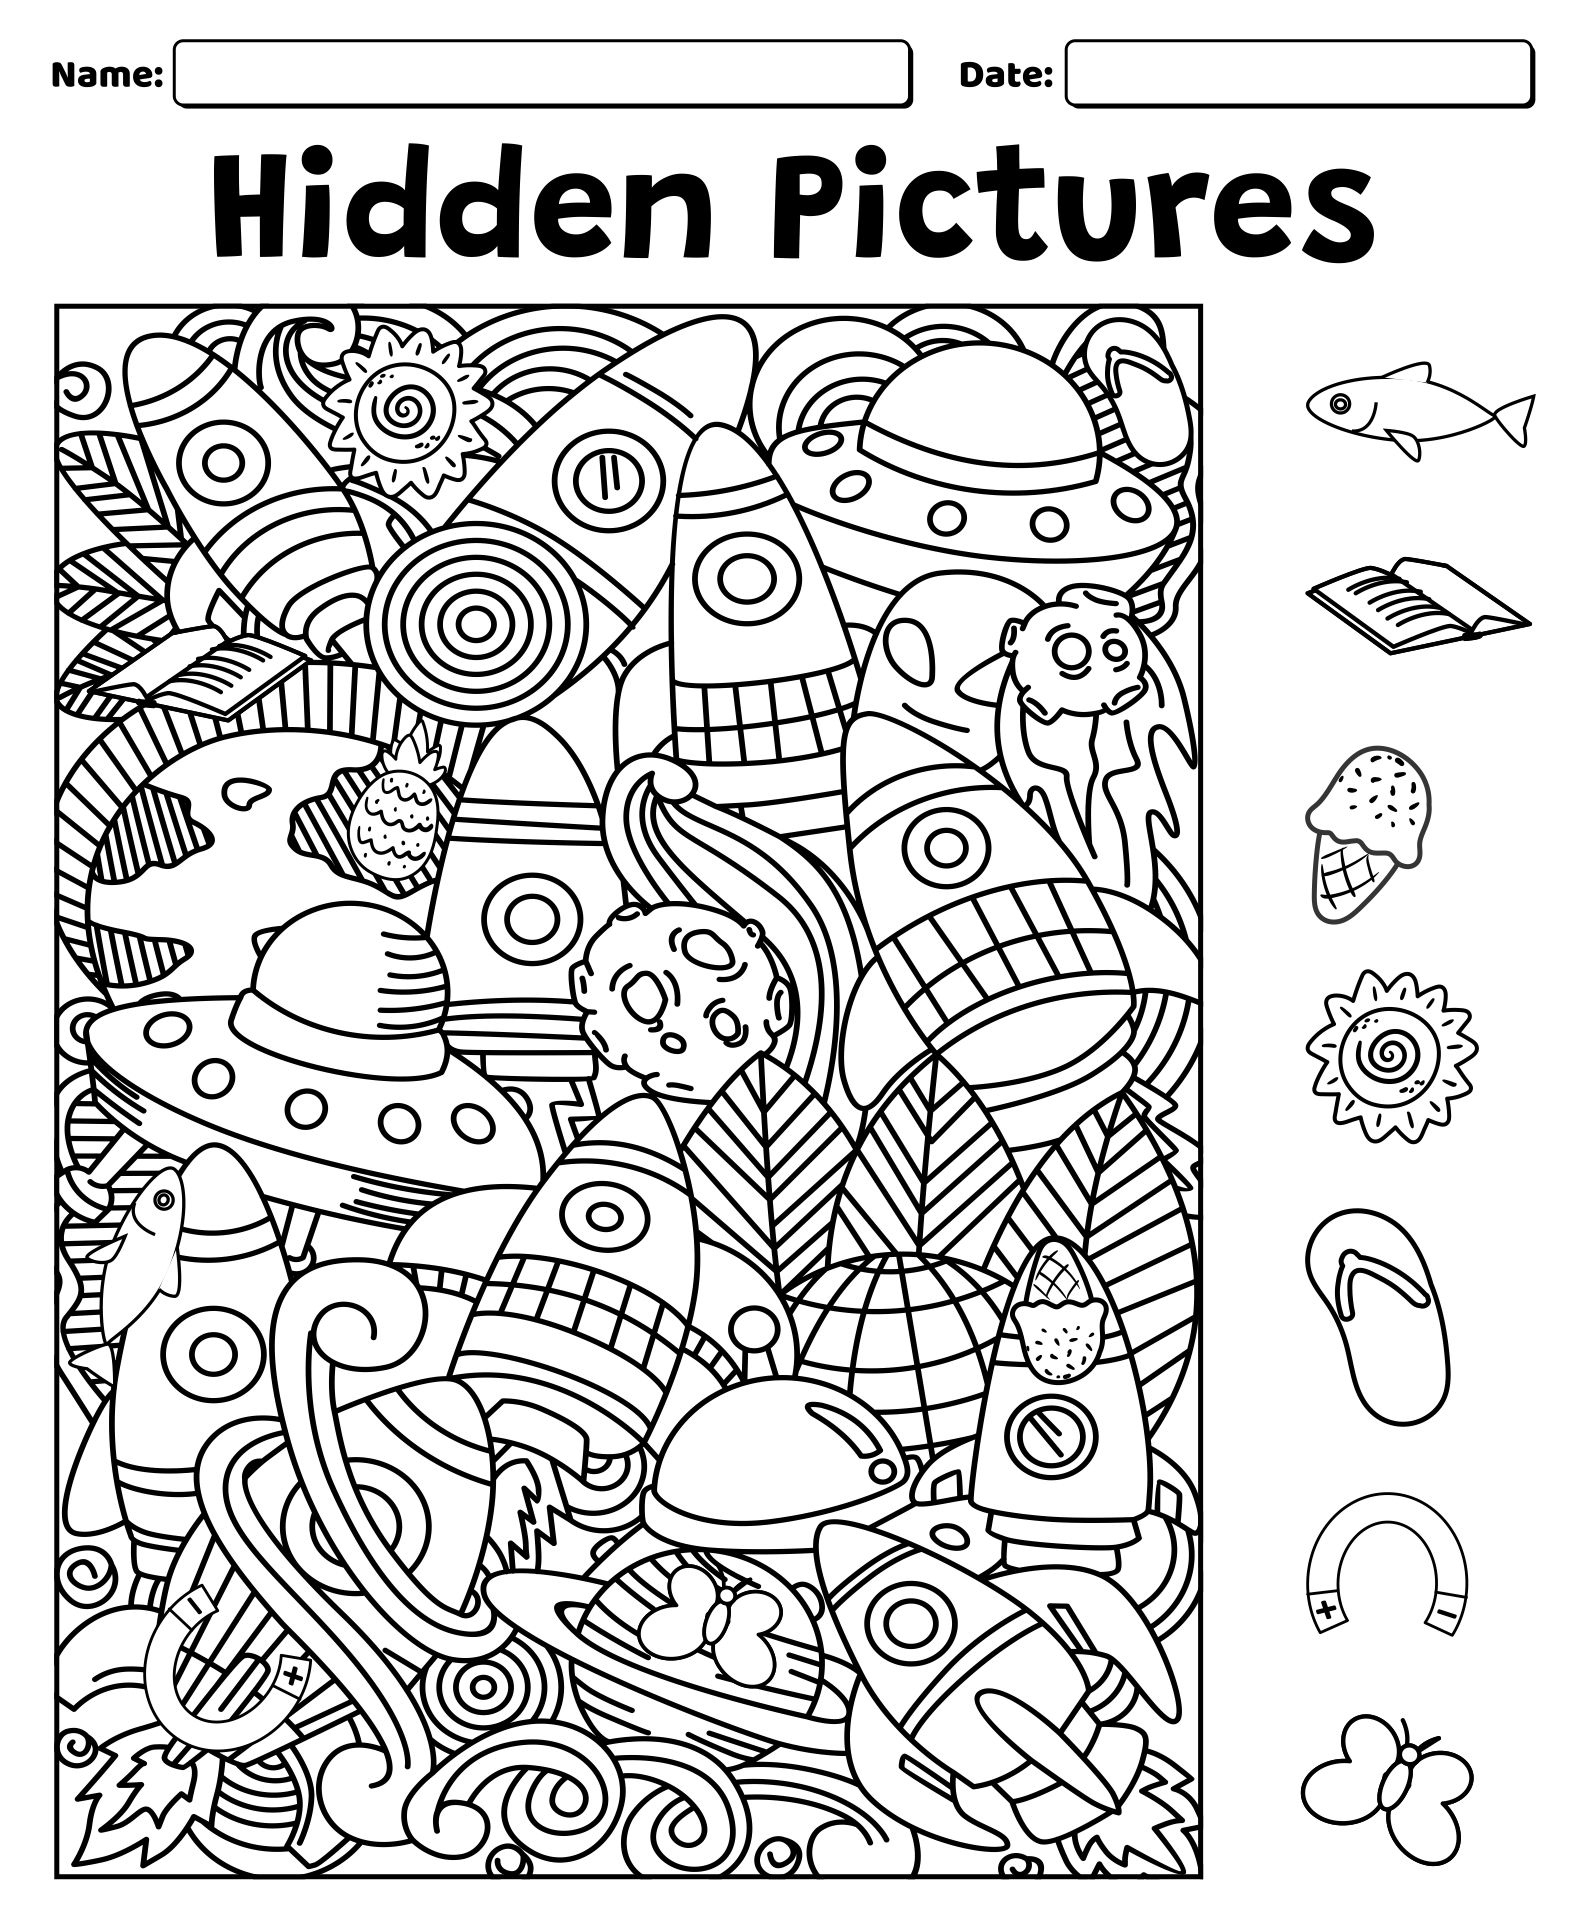 Buy Color And Find Hidden Object Coloring Page Printable Activity regarding Free Printable Hidden Pictures for Adults